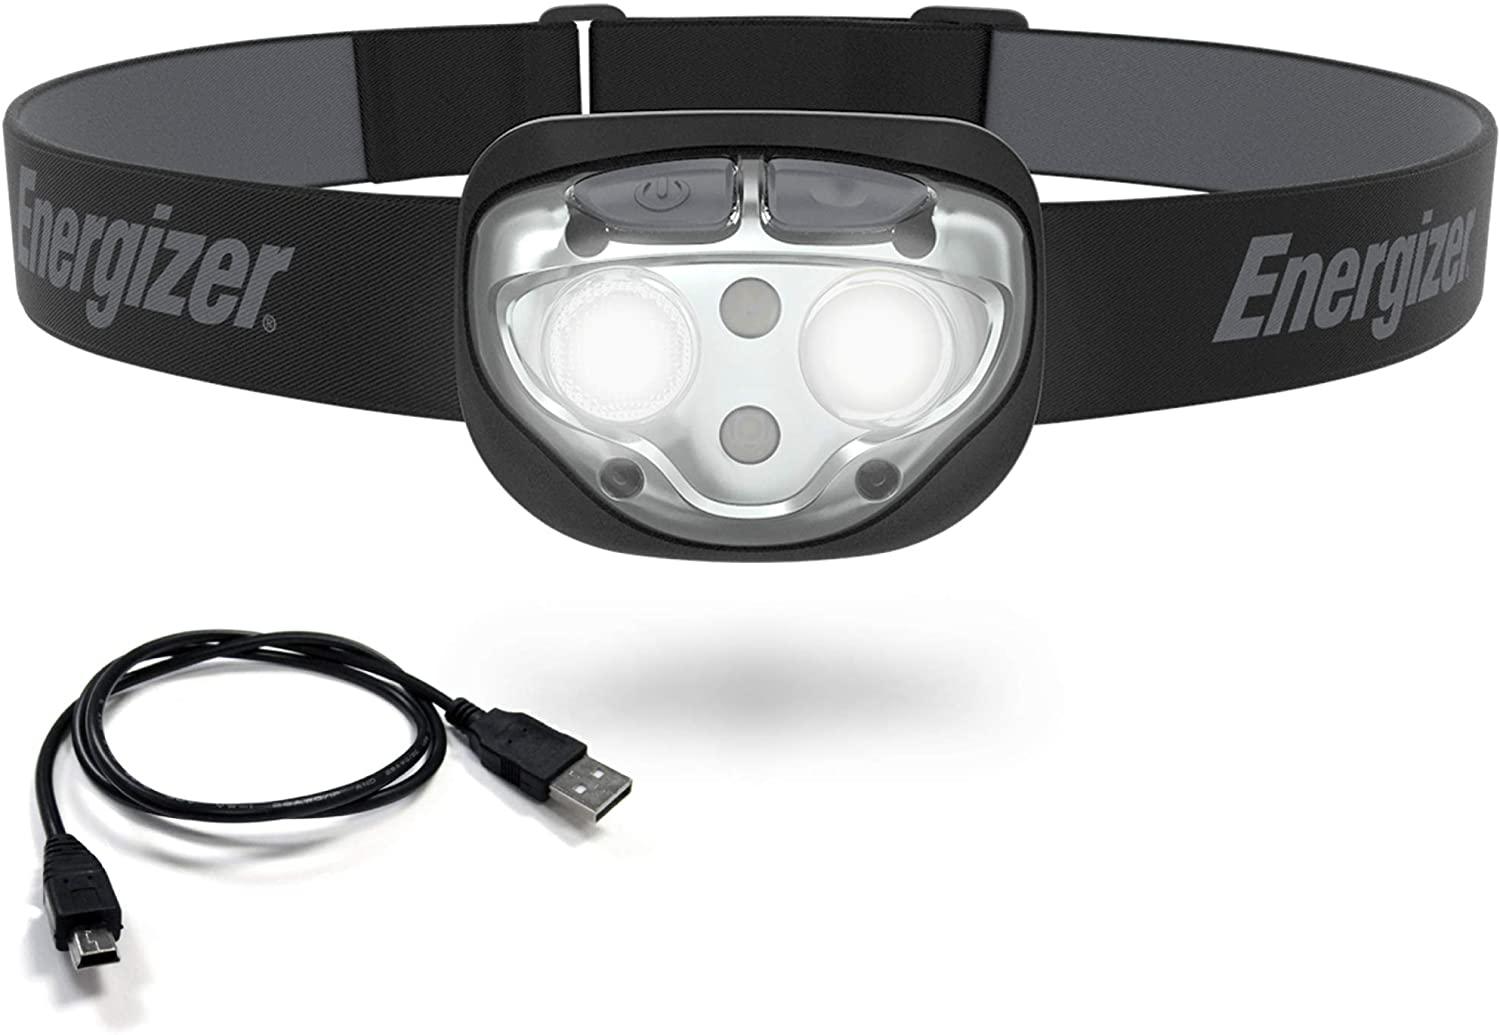 Energizer Rechargeable IPX4 Water Resistant LED Headlamp for $10.59 Shipped